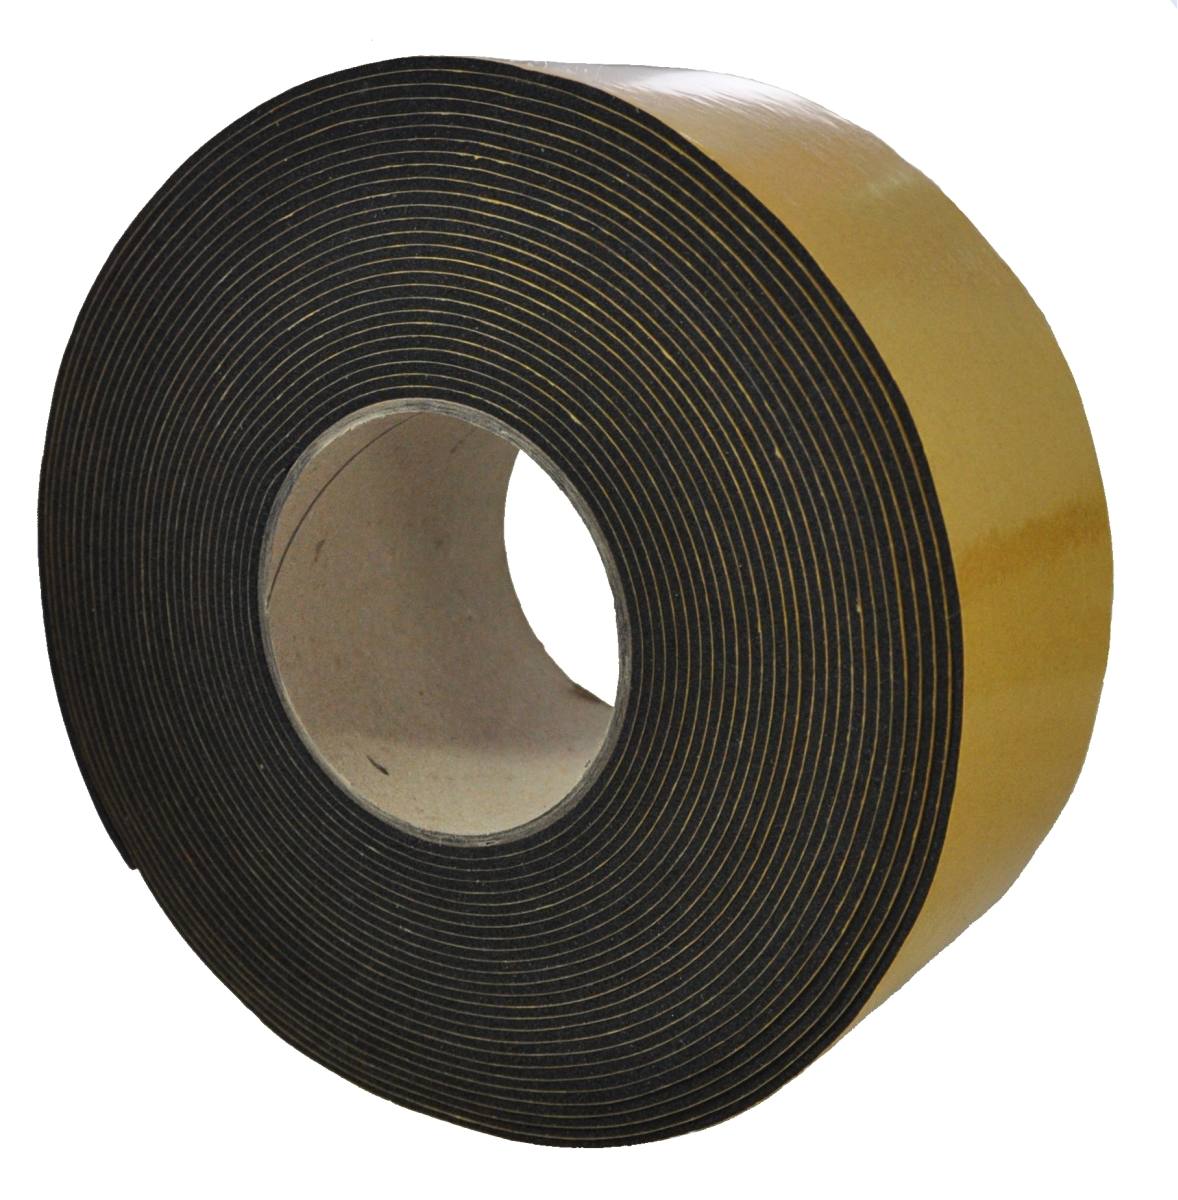 S-K-S EPDM 2mmx25mmx10m black self-adhesive on one side